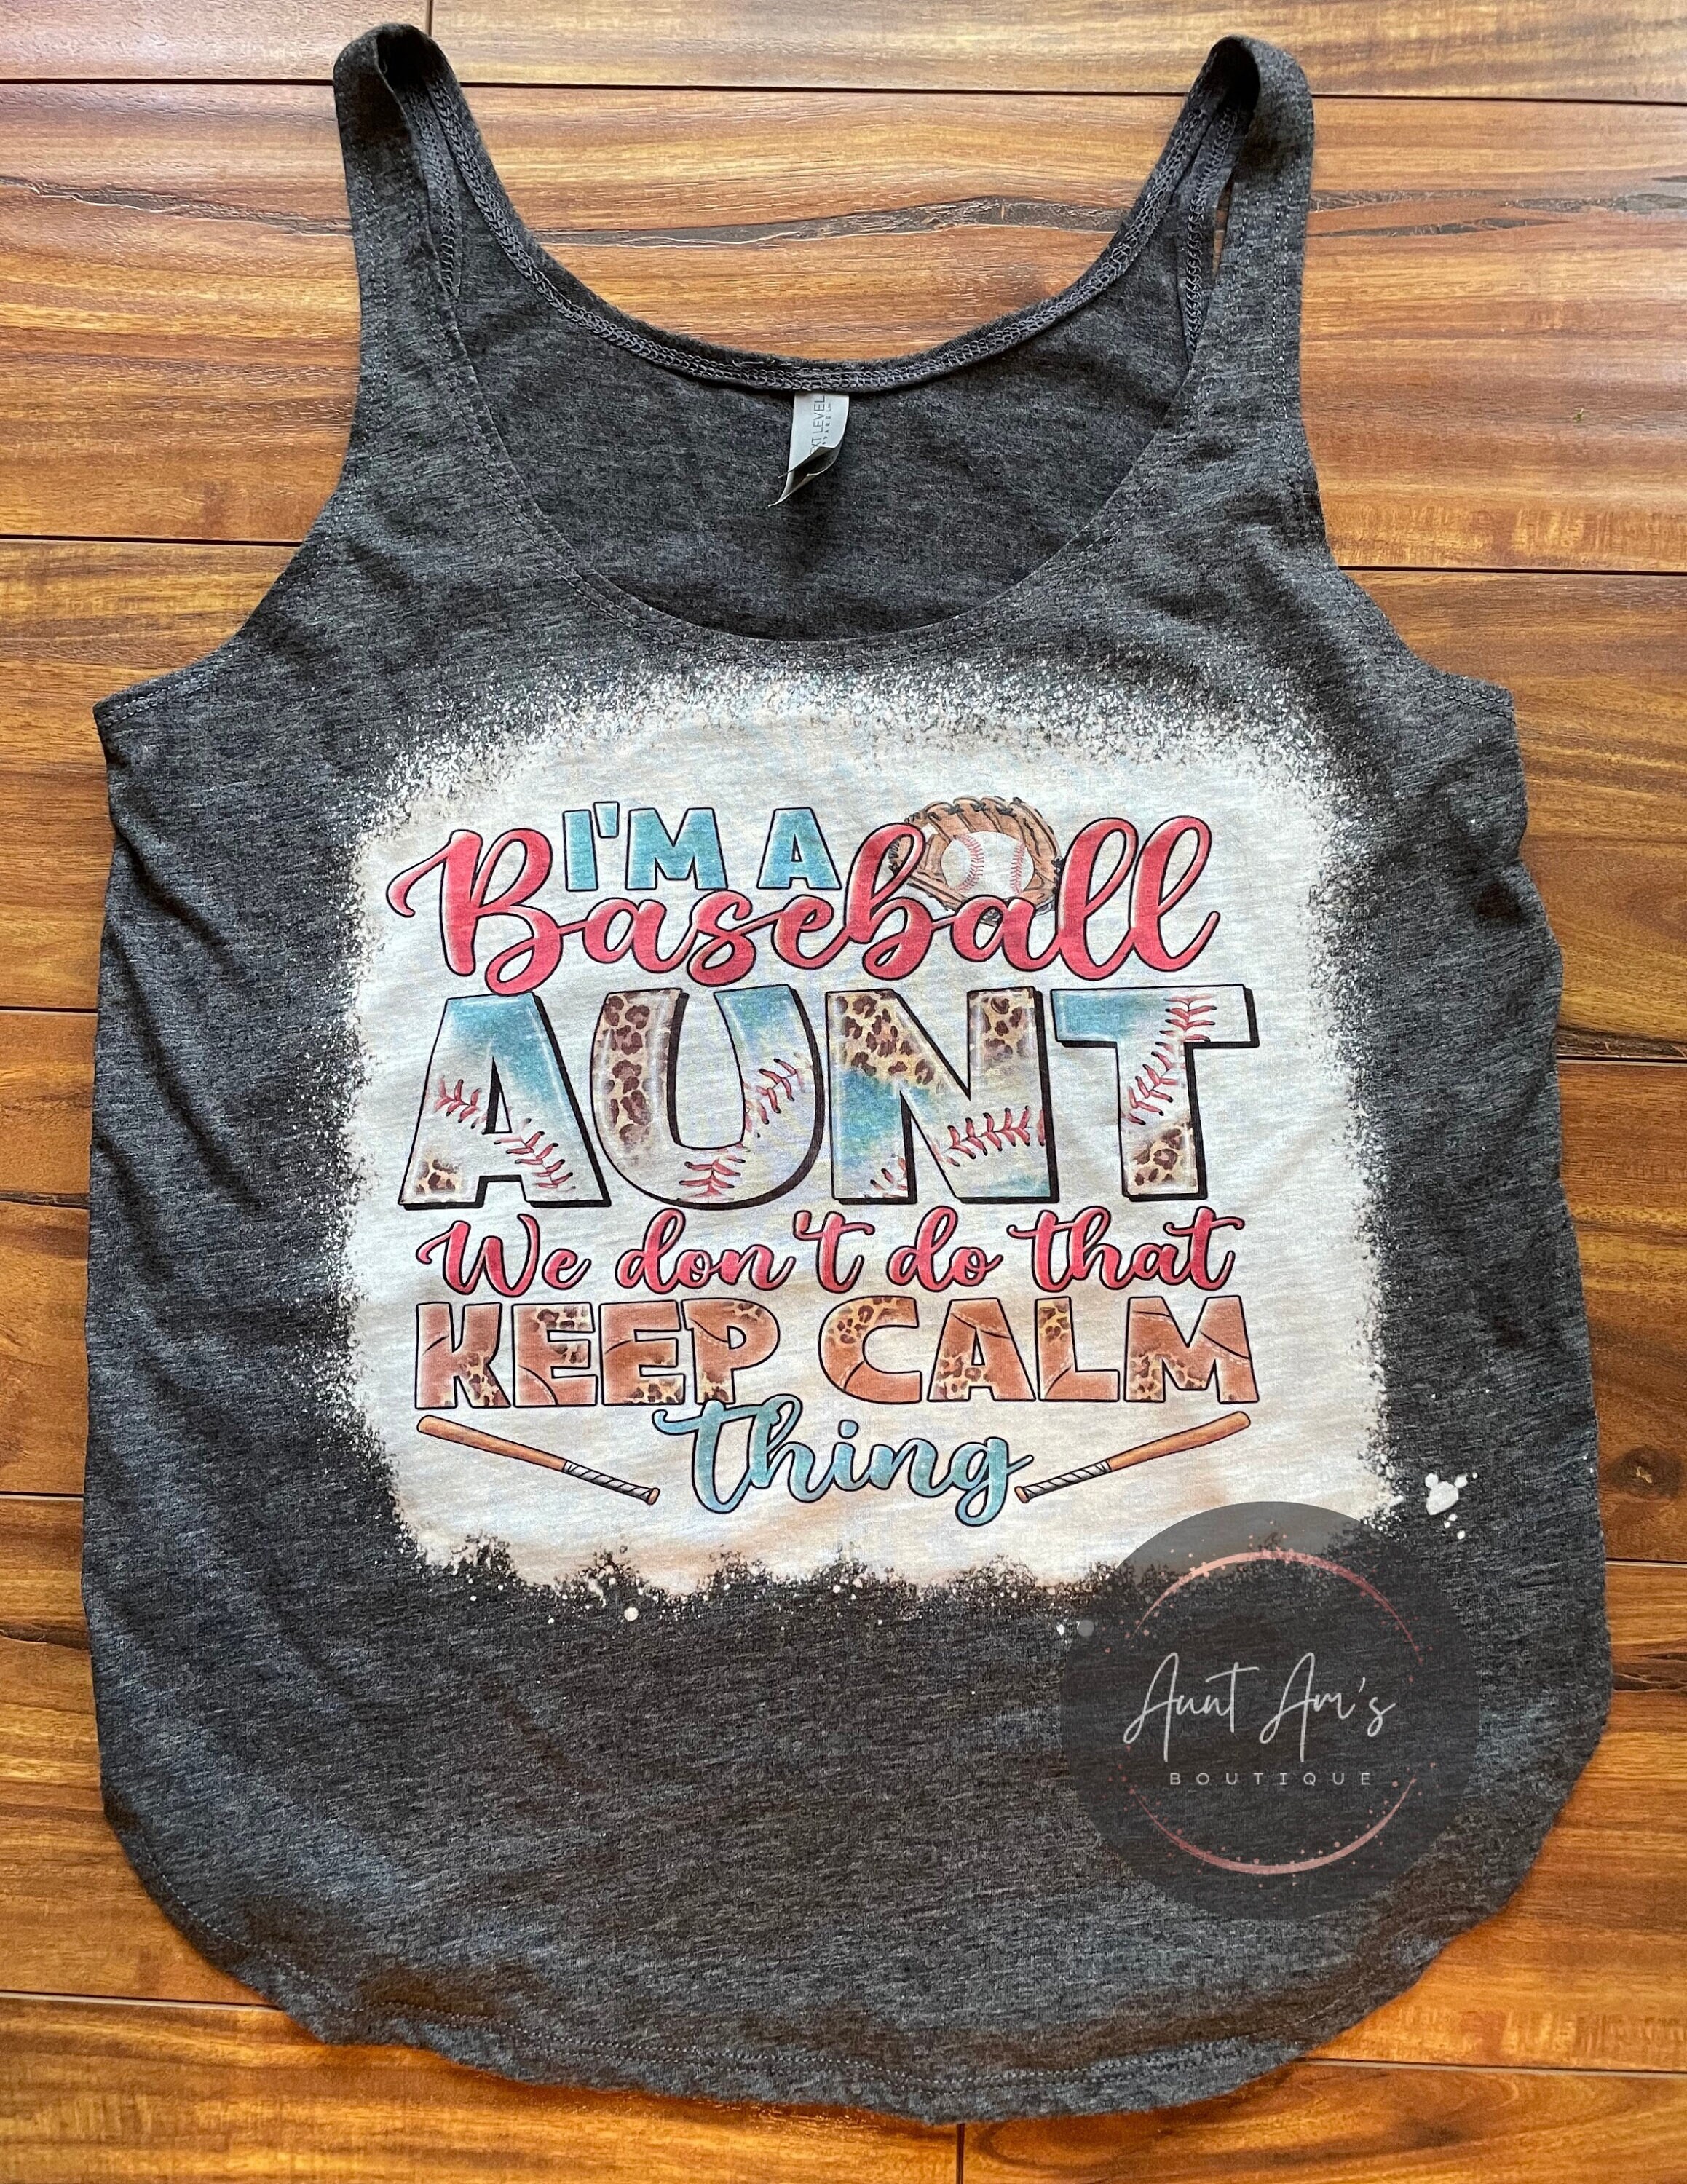 Pretty Little Thing Girl Tank Top, Girly Shirts, Cute Saying Shirts, Tank  Top for Girls, Birthday Gift Ideas, Unique Tank Tops, Unique Shirt